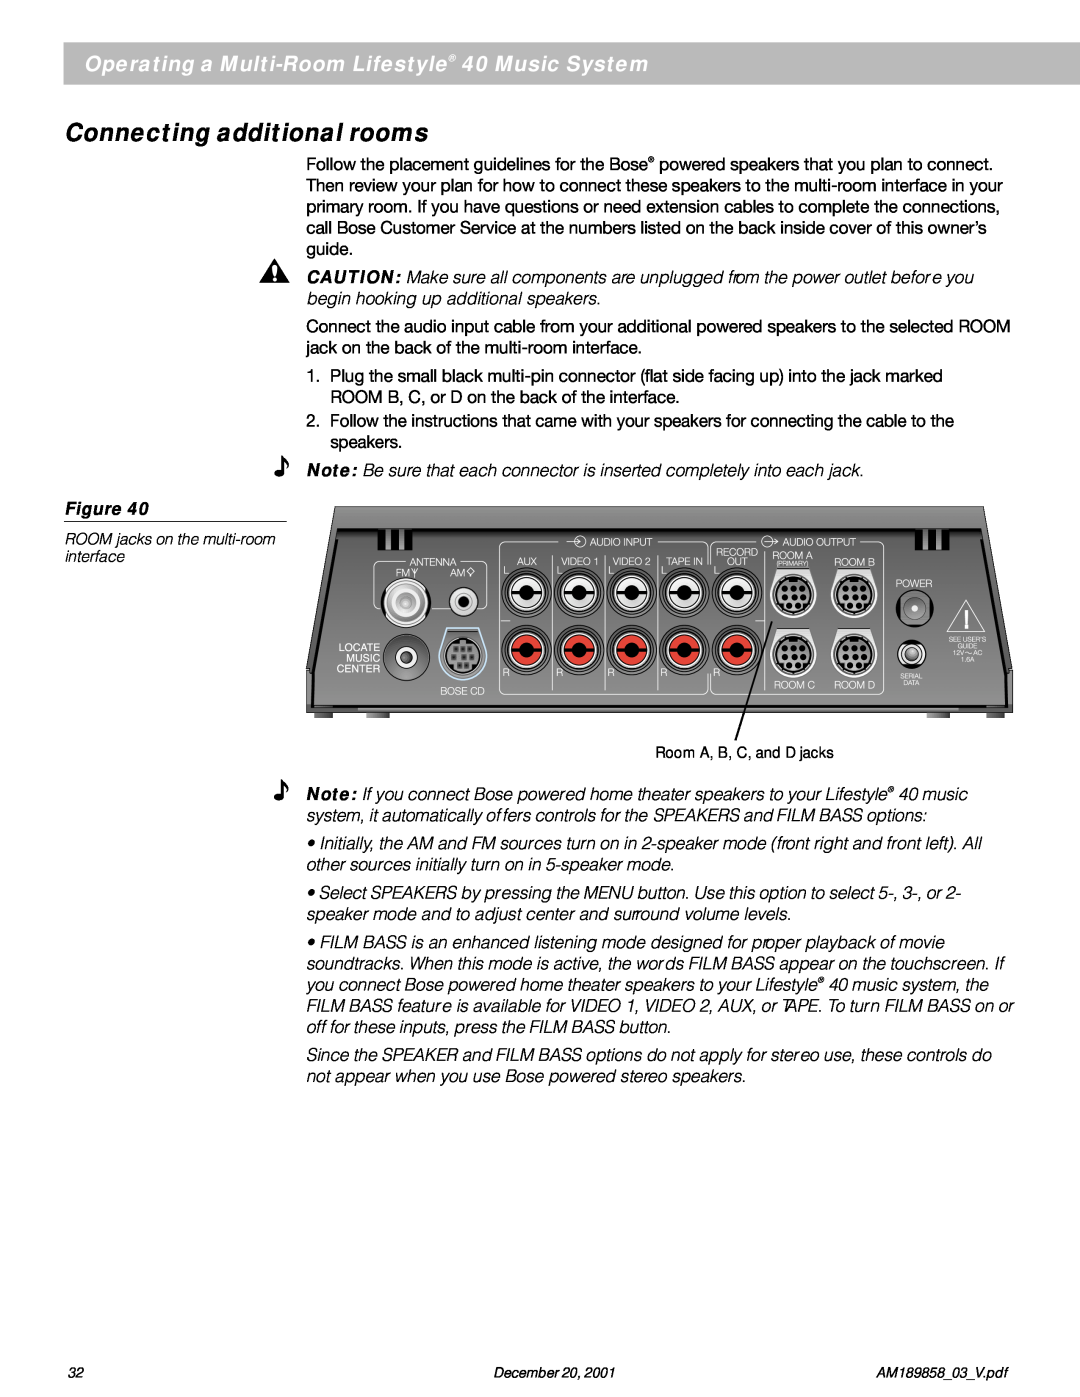 Bose manual Connecting additional rooms, Operating a Multi-RoomLifestyle 40 Music System, Figure 